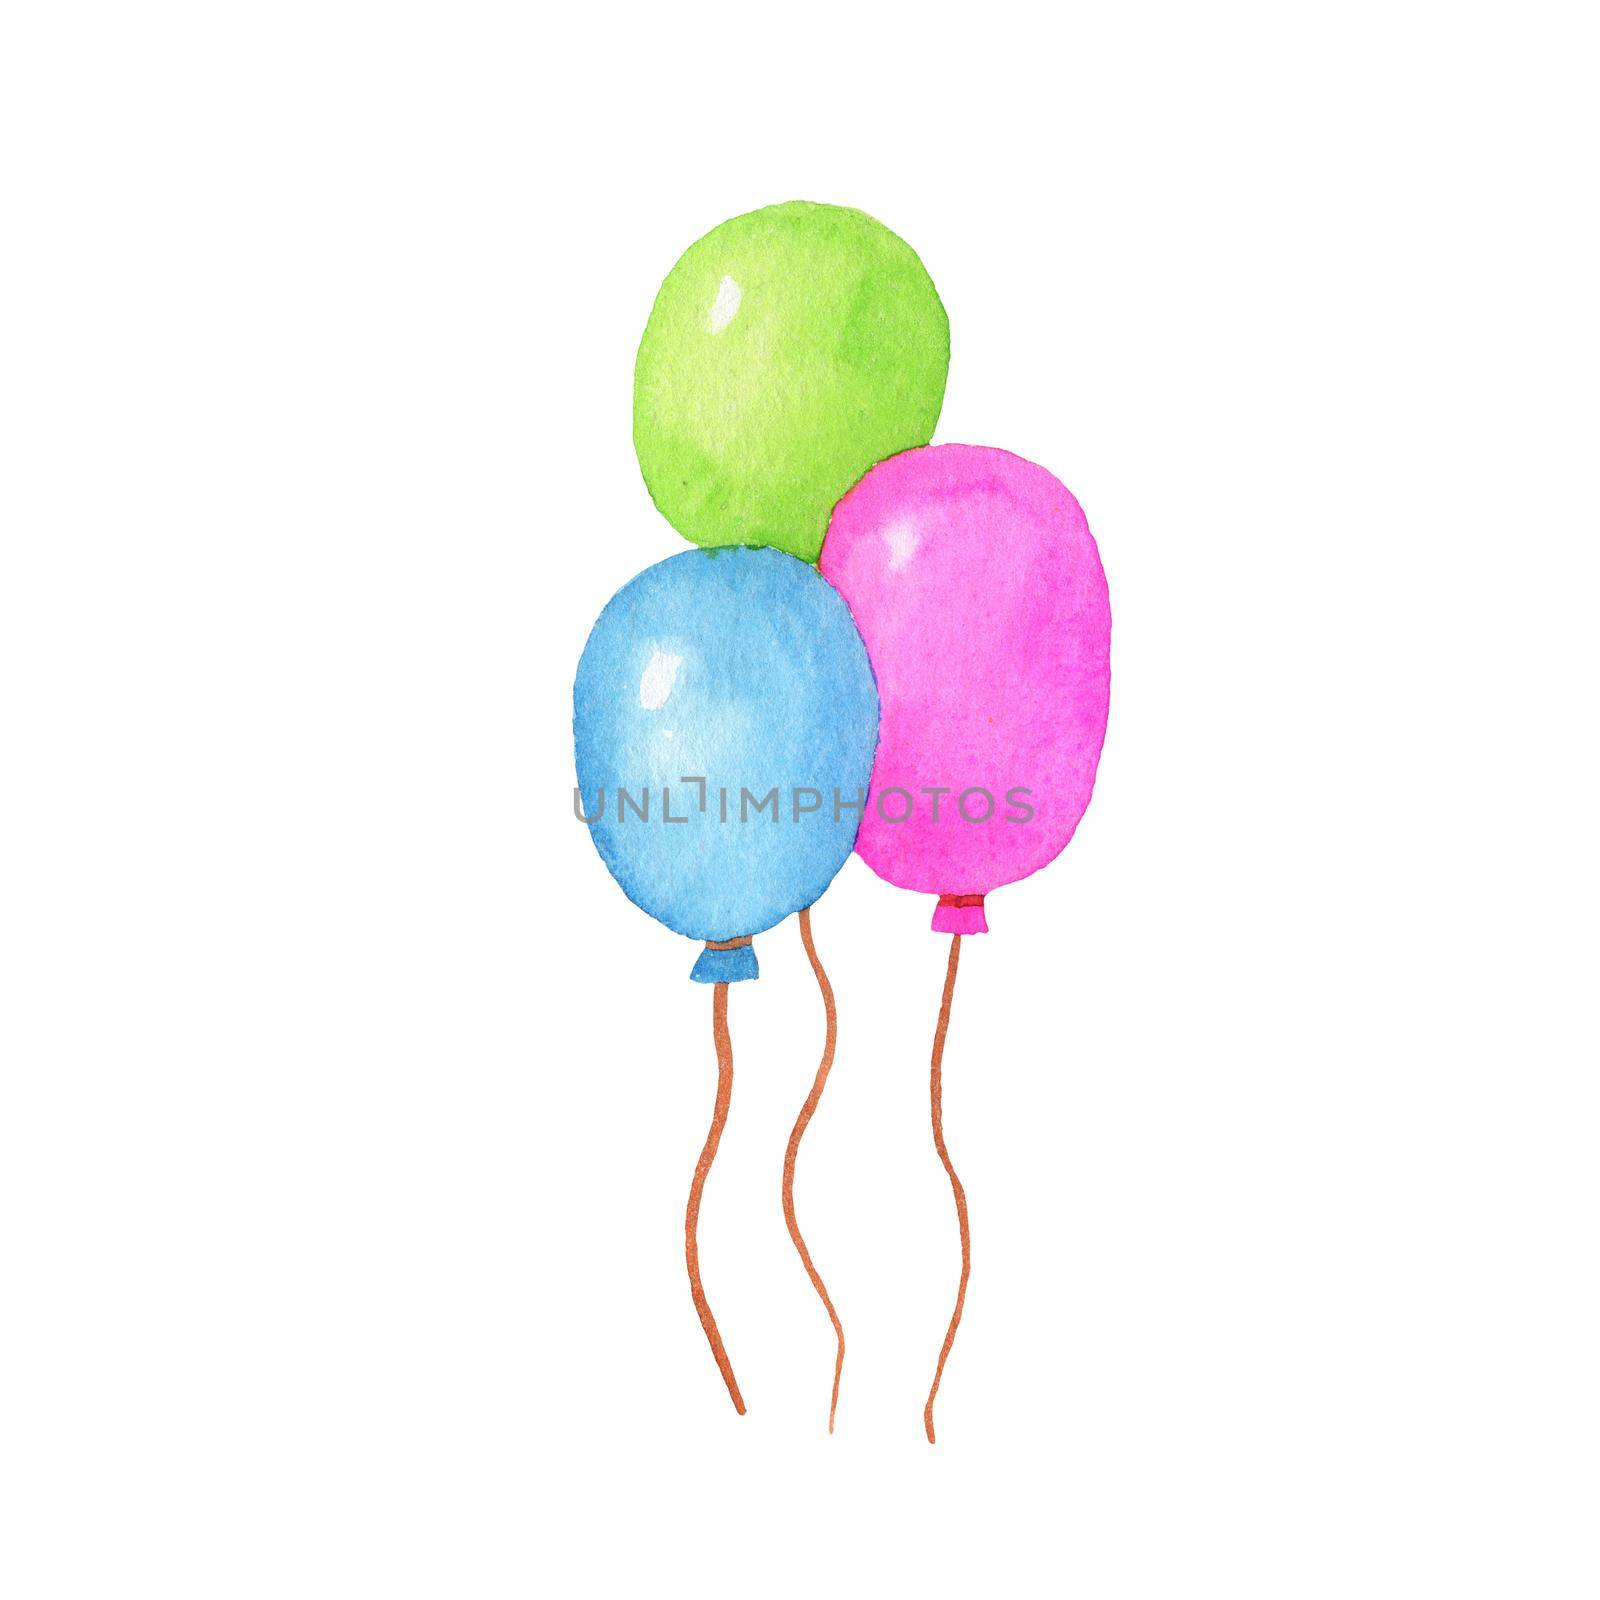 Colorful bunch of balloons. Watercolor hand drawn illustration isolated on white background